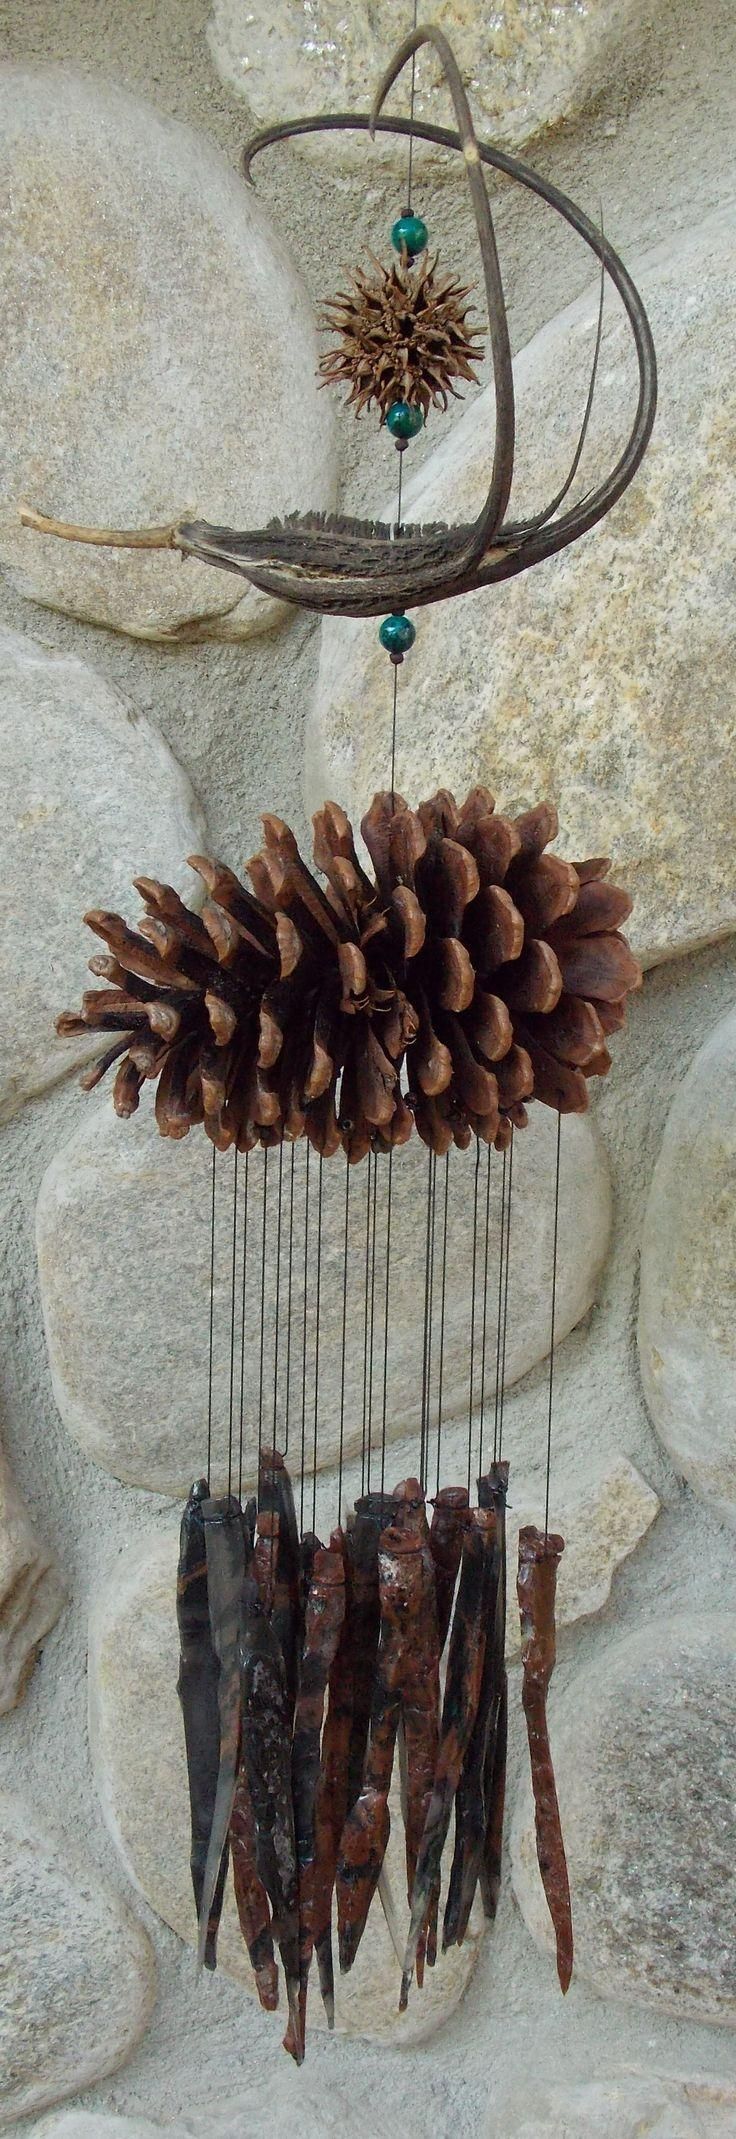 Best 25+ Pine Cone Art Ideas On Pinterest | Pinecone Crafts Kids Inside Pine Cone Wall Art (View 14 of 20)